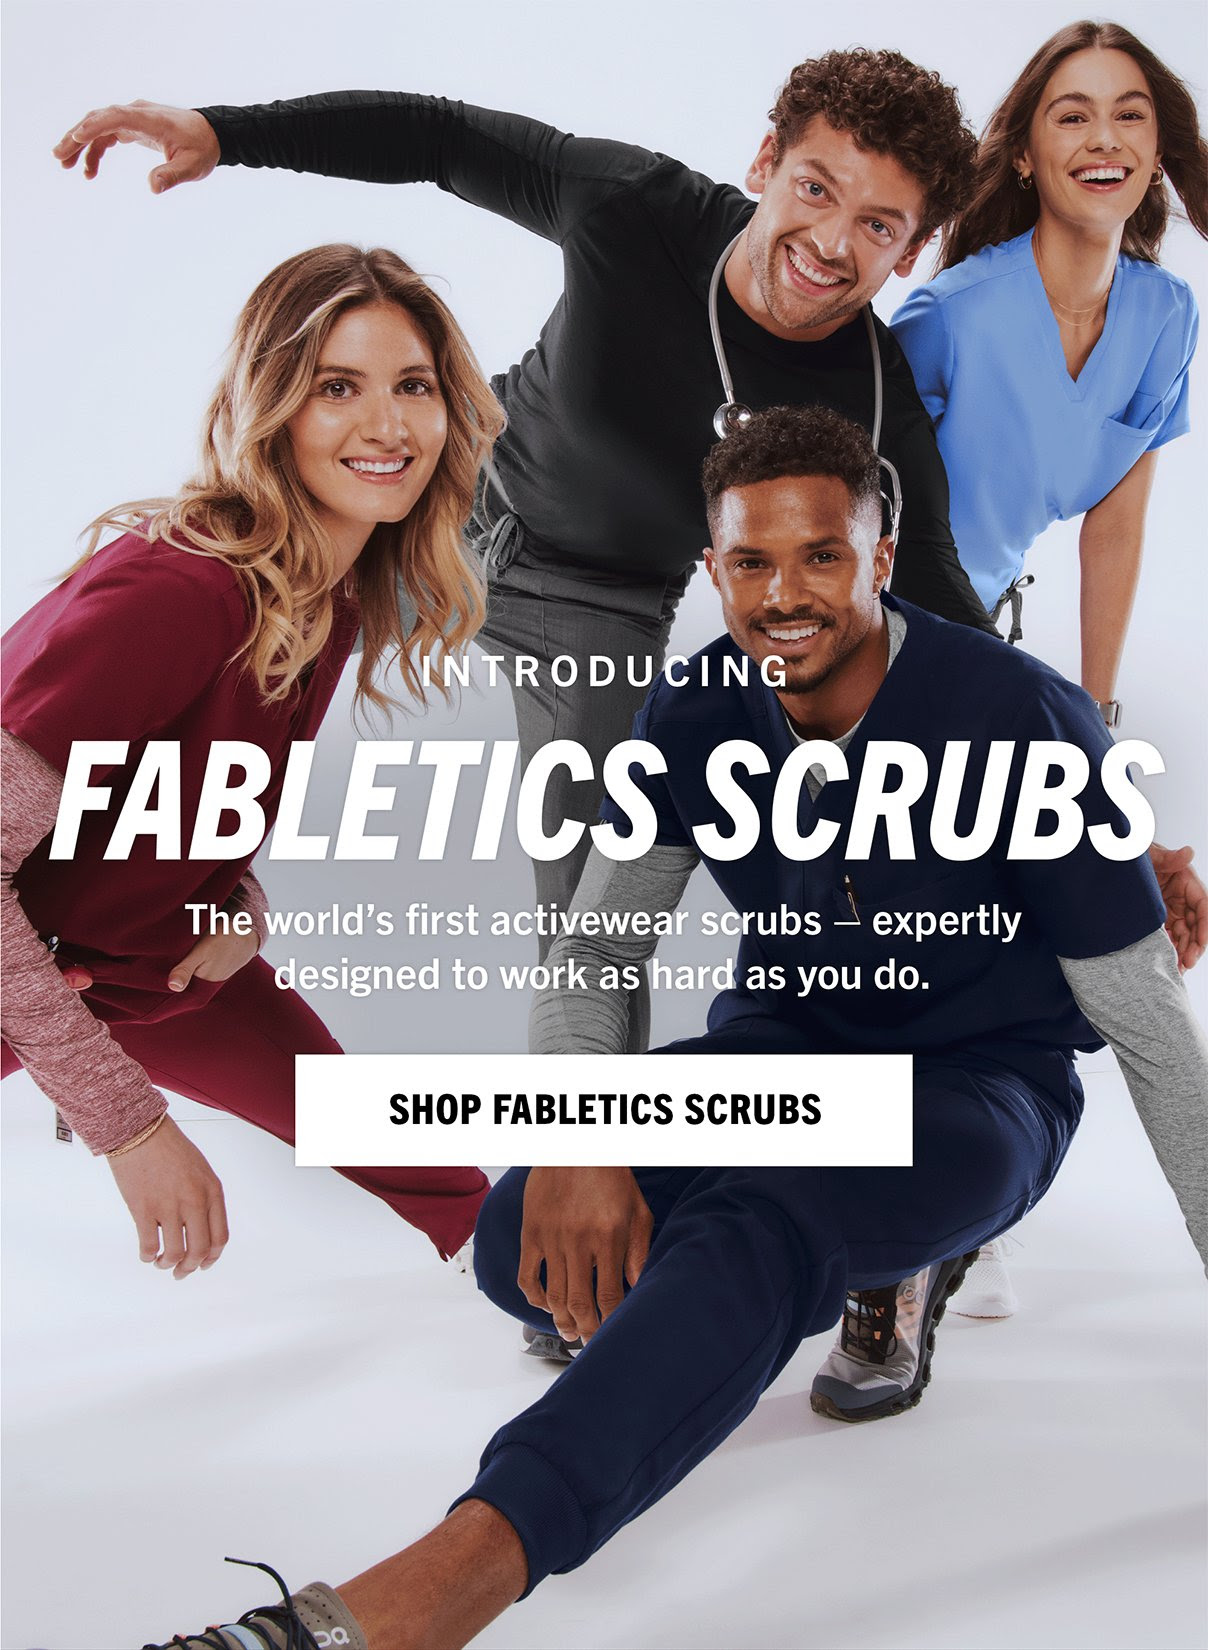 New Fabletics Scrubs: The World's First and Only Activewear Scrubs